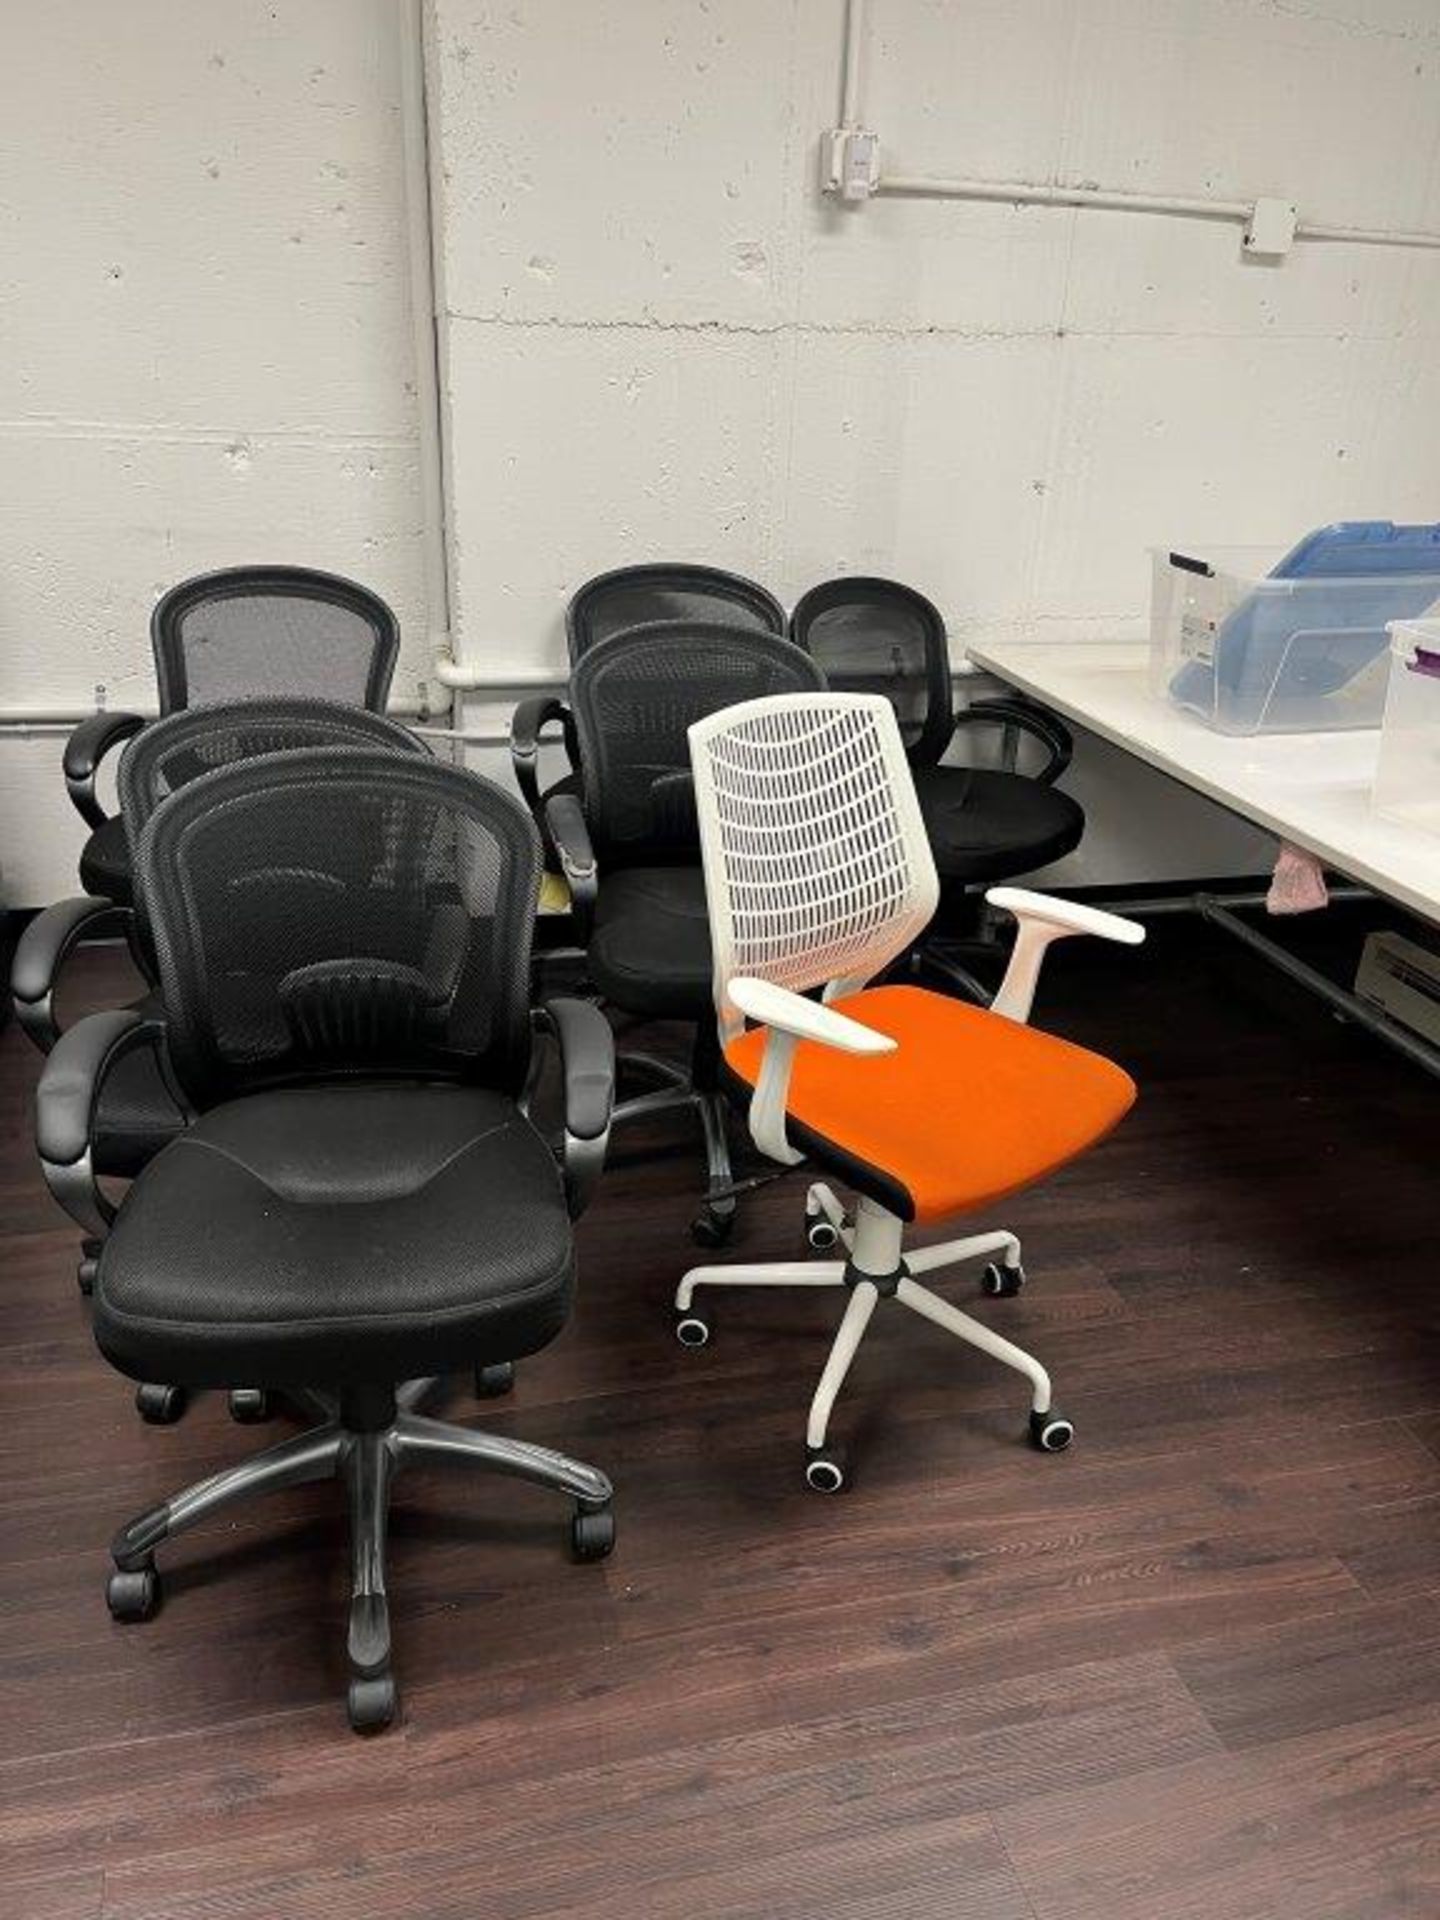 (2) Assorted Wood Top Tables with Galvanized Tubing Base 145" x 65" and (8) Office Chairs - Image 2 of 2